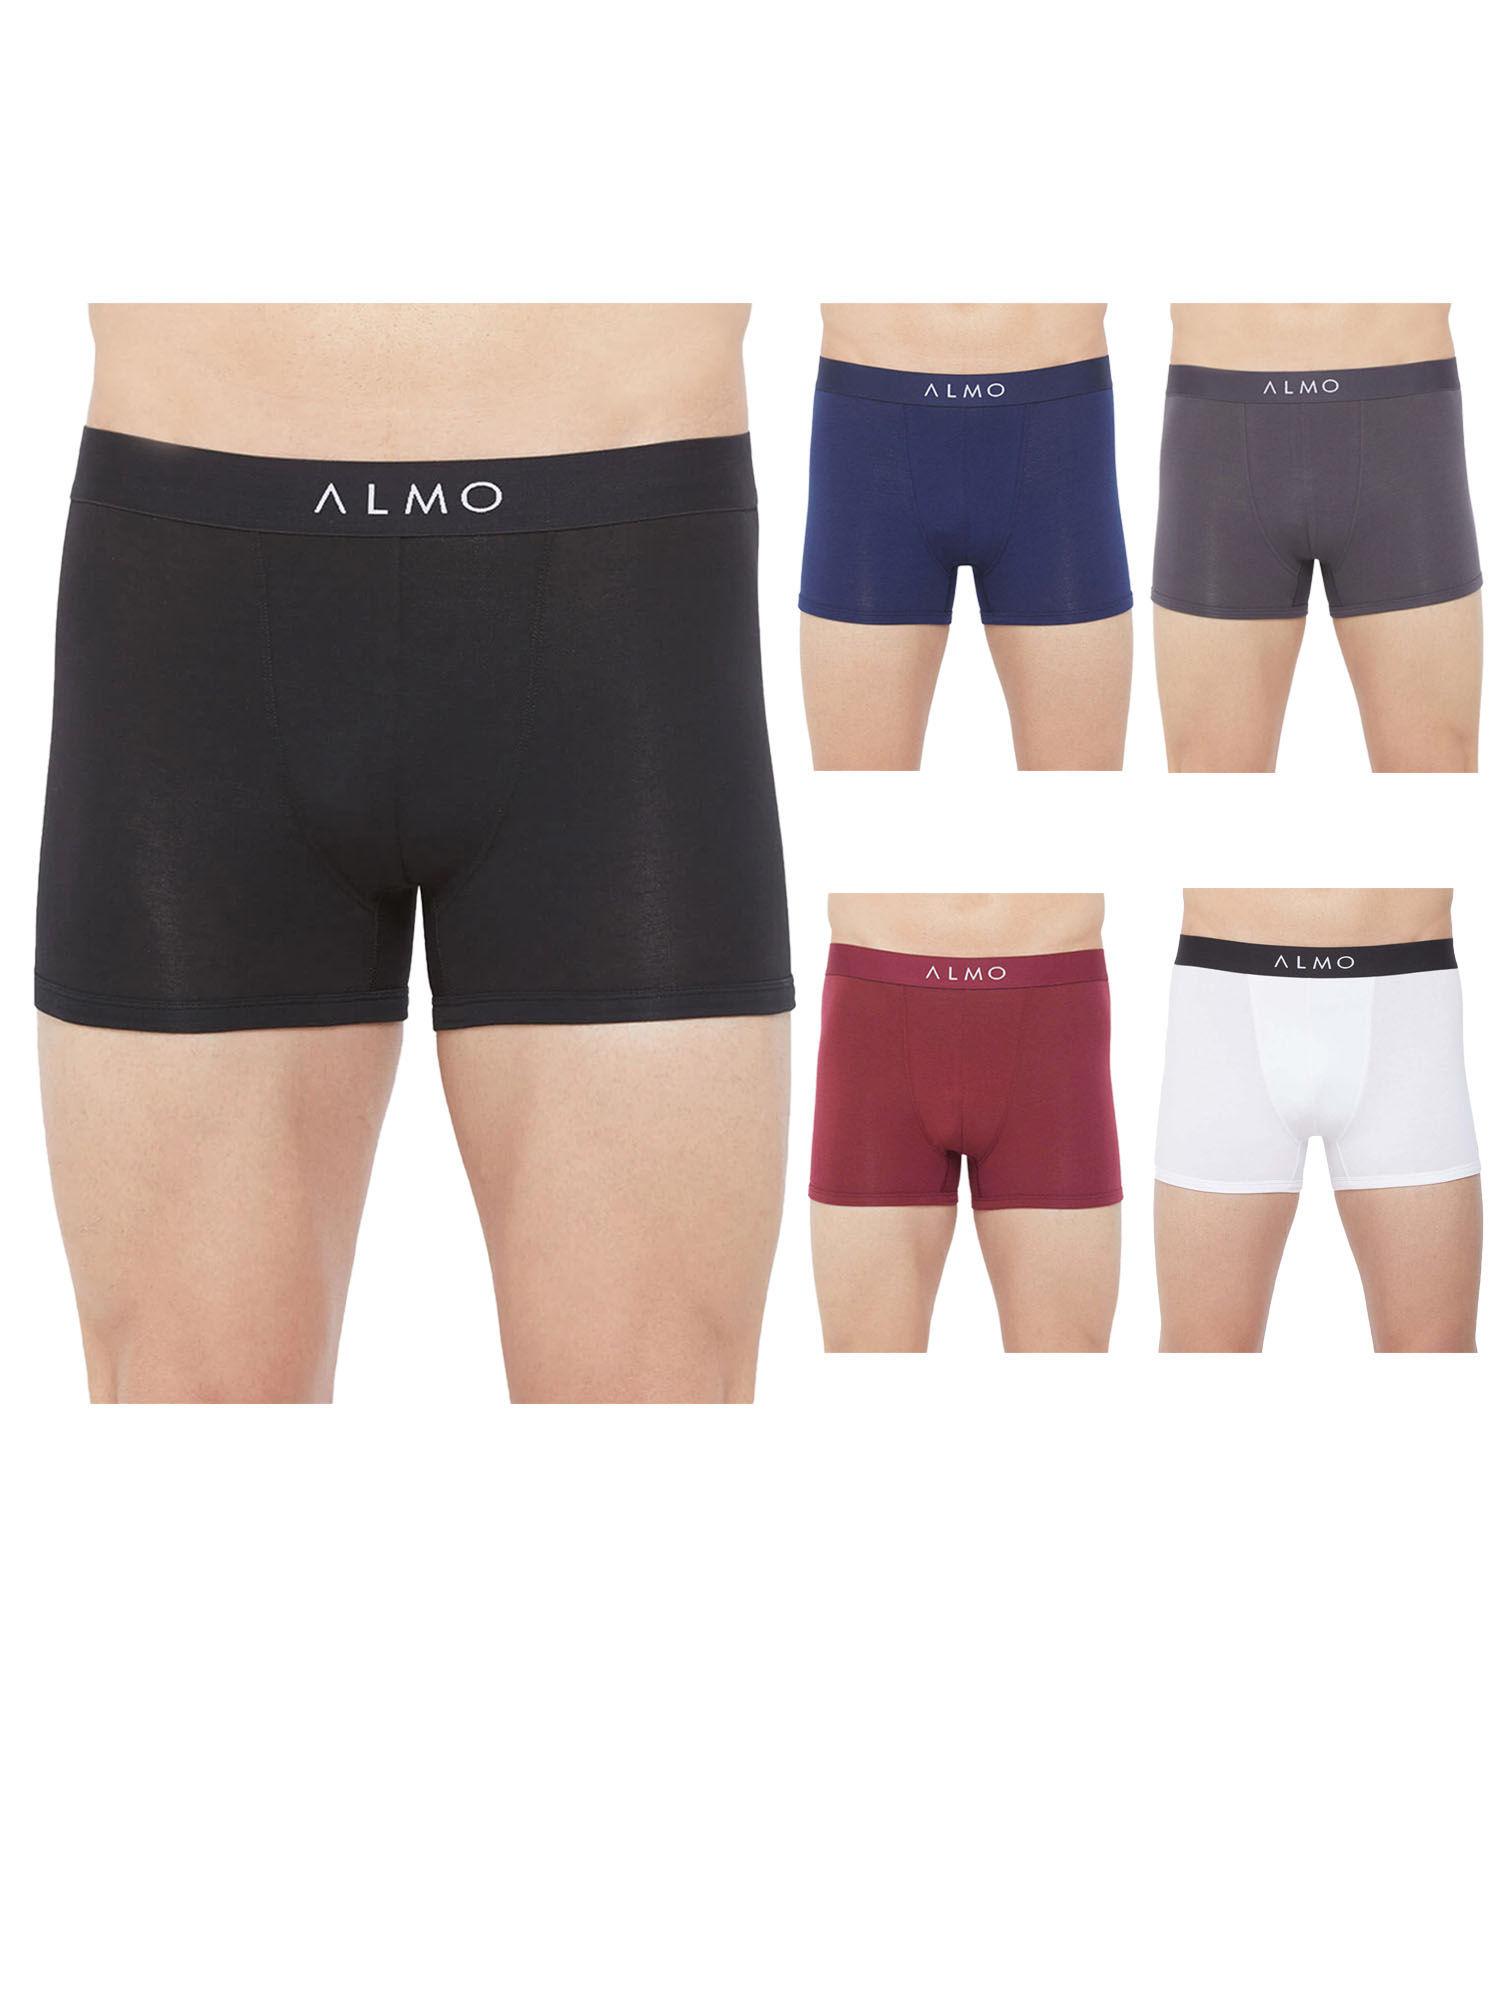 rico organic cotton trunk (pack of 5)